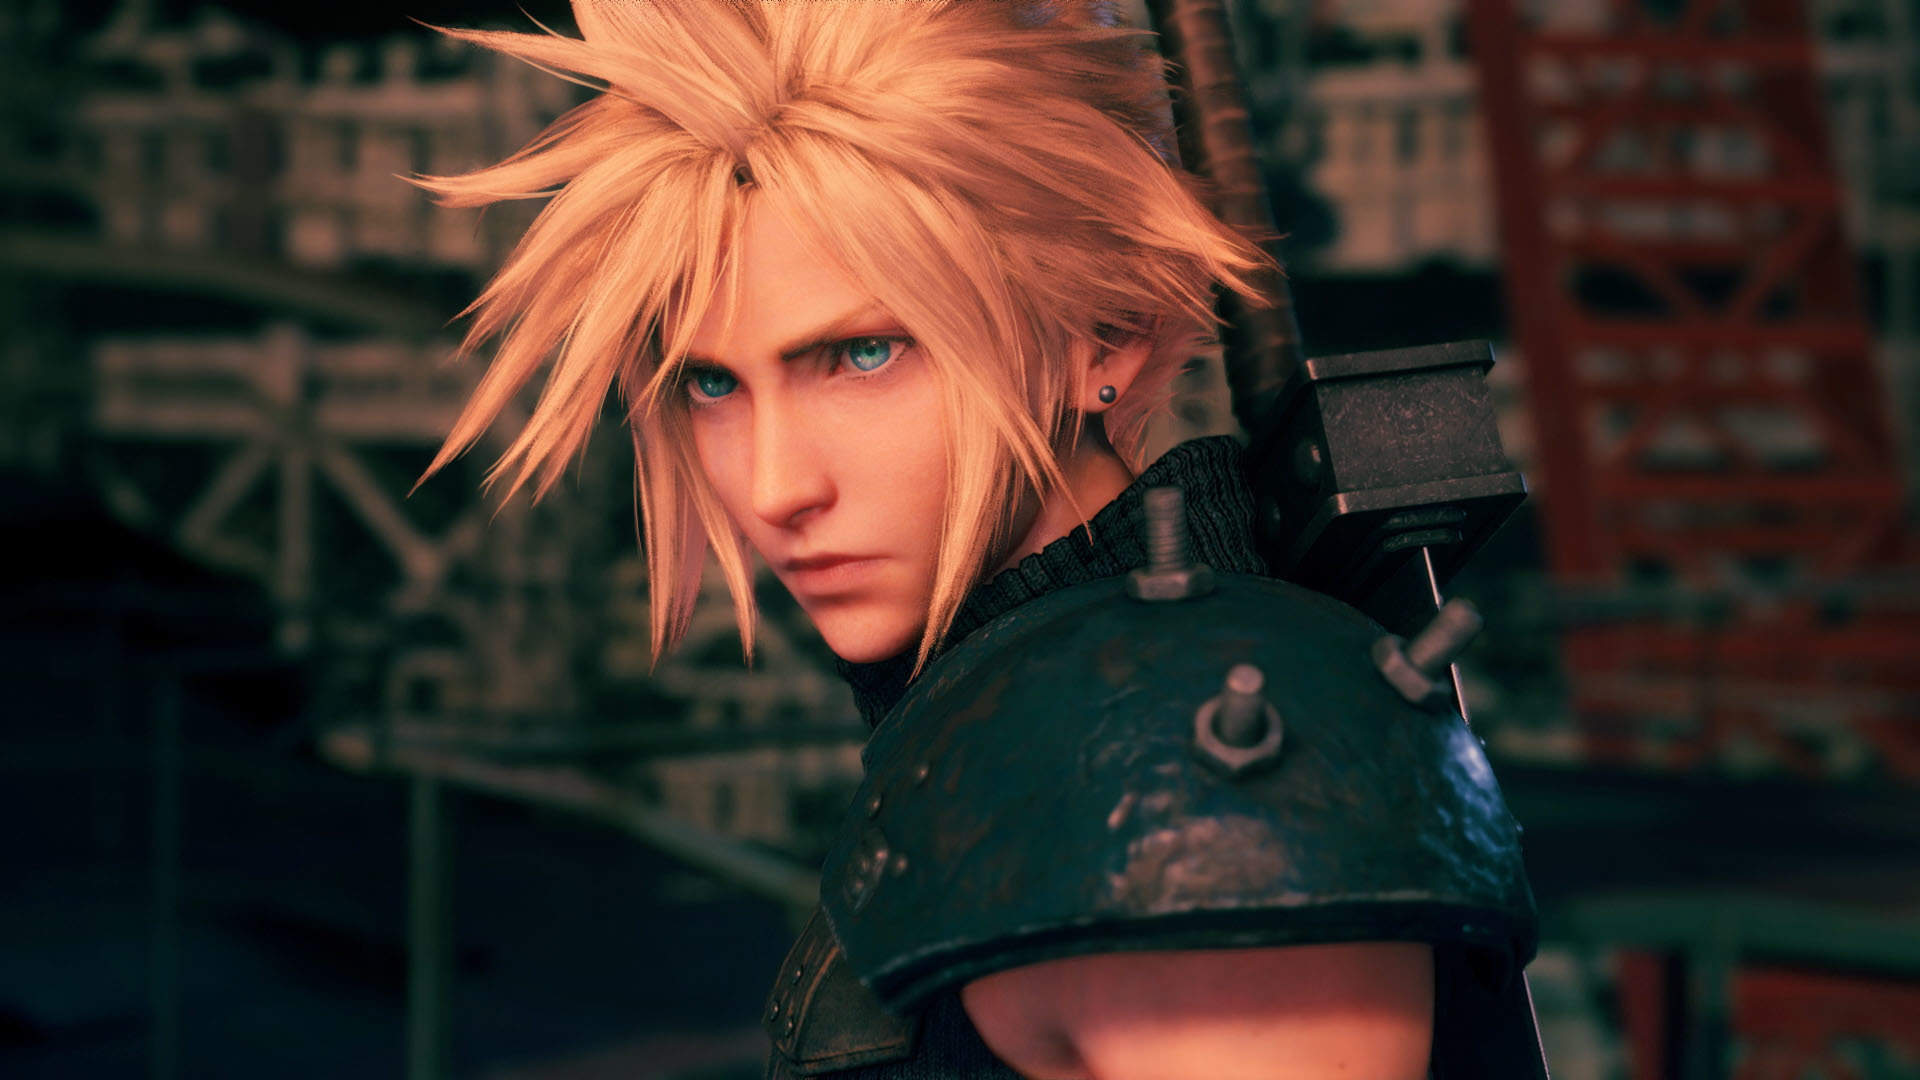 Characters working second jobs - Cloud Strife Becomes a Mercenary Terrorist